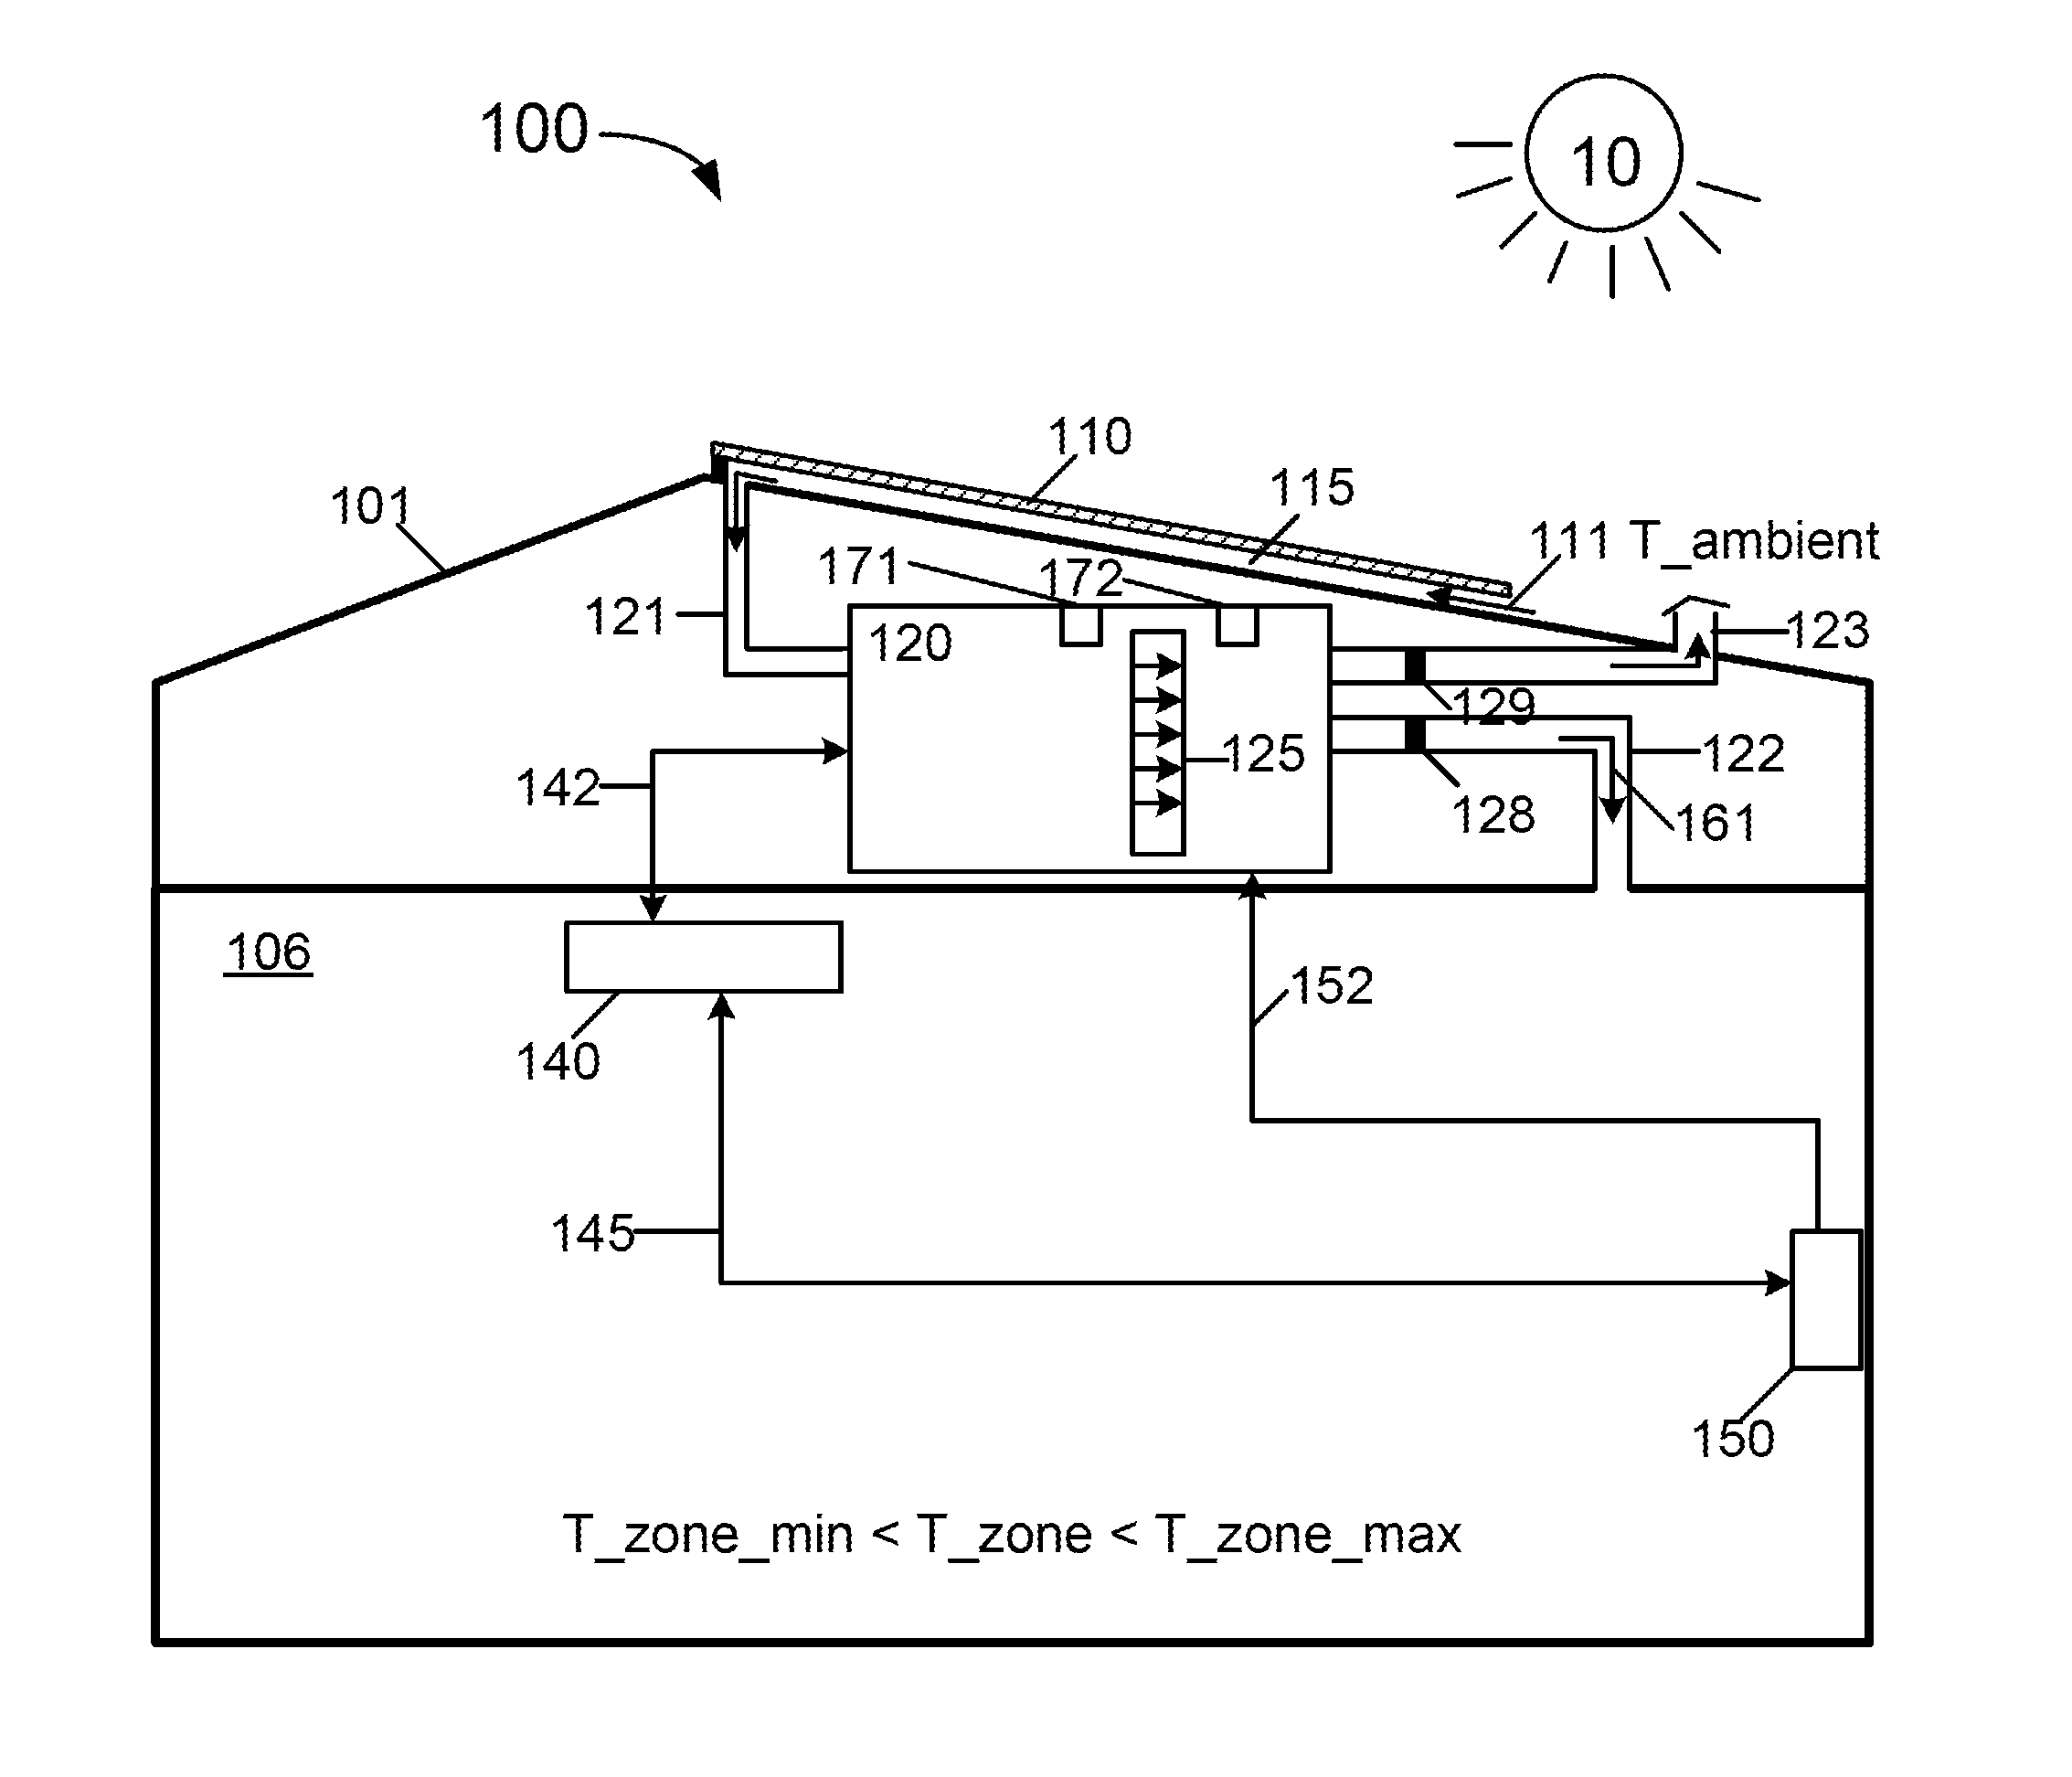 Method and system of ventilation for a healthy home configured for efficient energy usage and conservation of energy resources